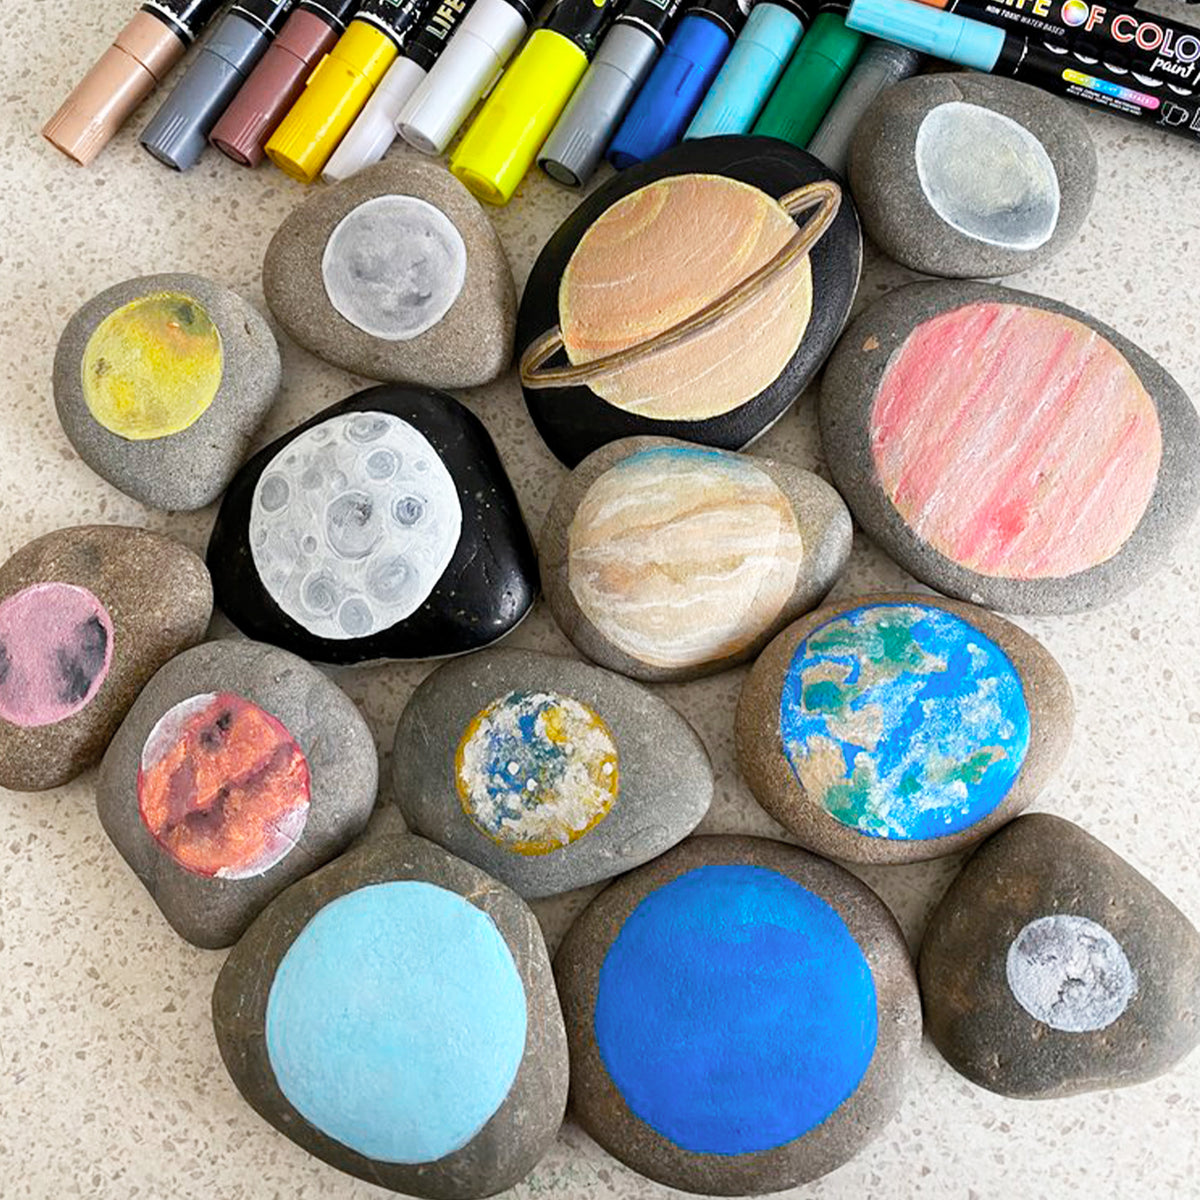 Life of Colour - Rock painting is about bringing colour into your life, and  sharing that colour with others 💜💙💚 Shop the best rock painting supplies  👉    Rock collection by